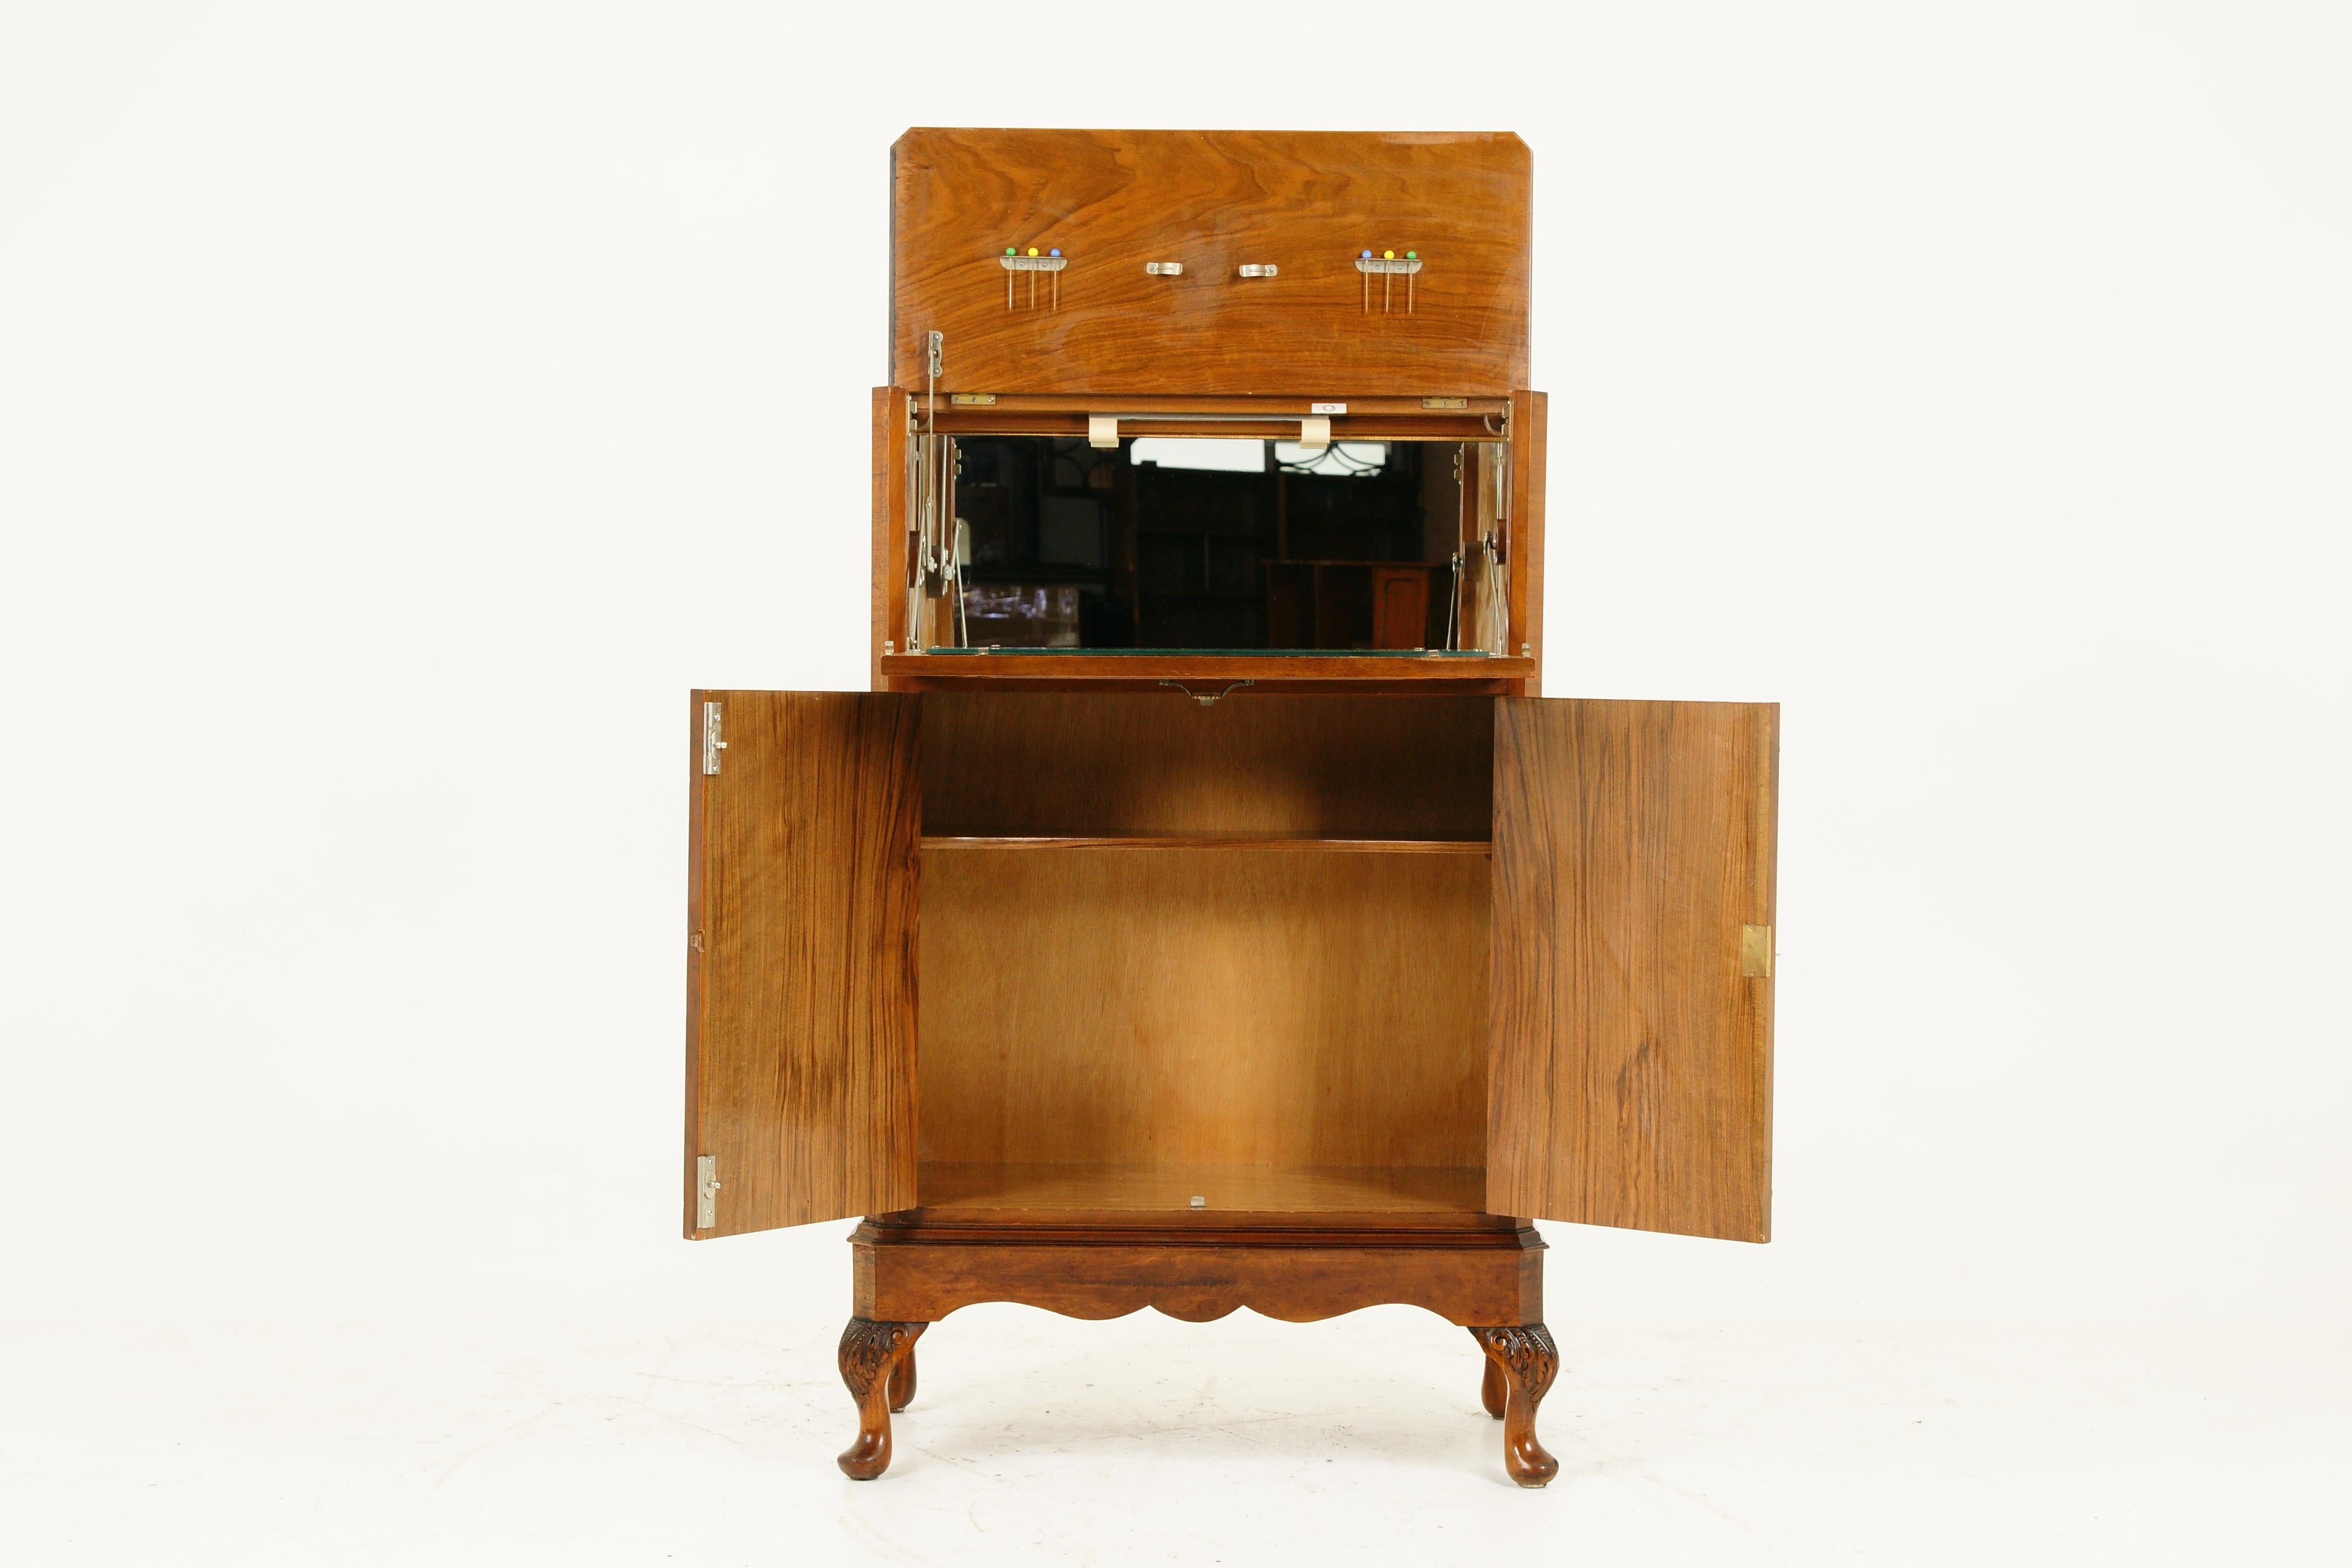 Art Deco burr walnut cocktail cabinet, drink cabinet, Scotland 1930, B1649 

Scotland, 1930
Solid walnut veneer
Original finish
Rectangular burr walnut top
When the fall front is pulled down it activates the top which raises it into an upright